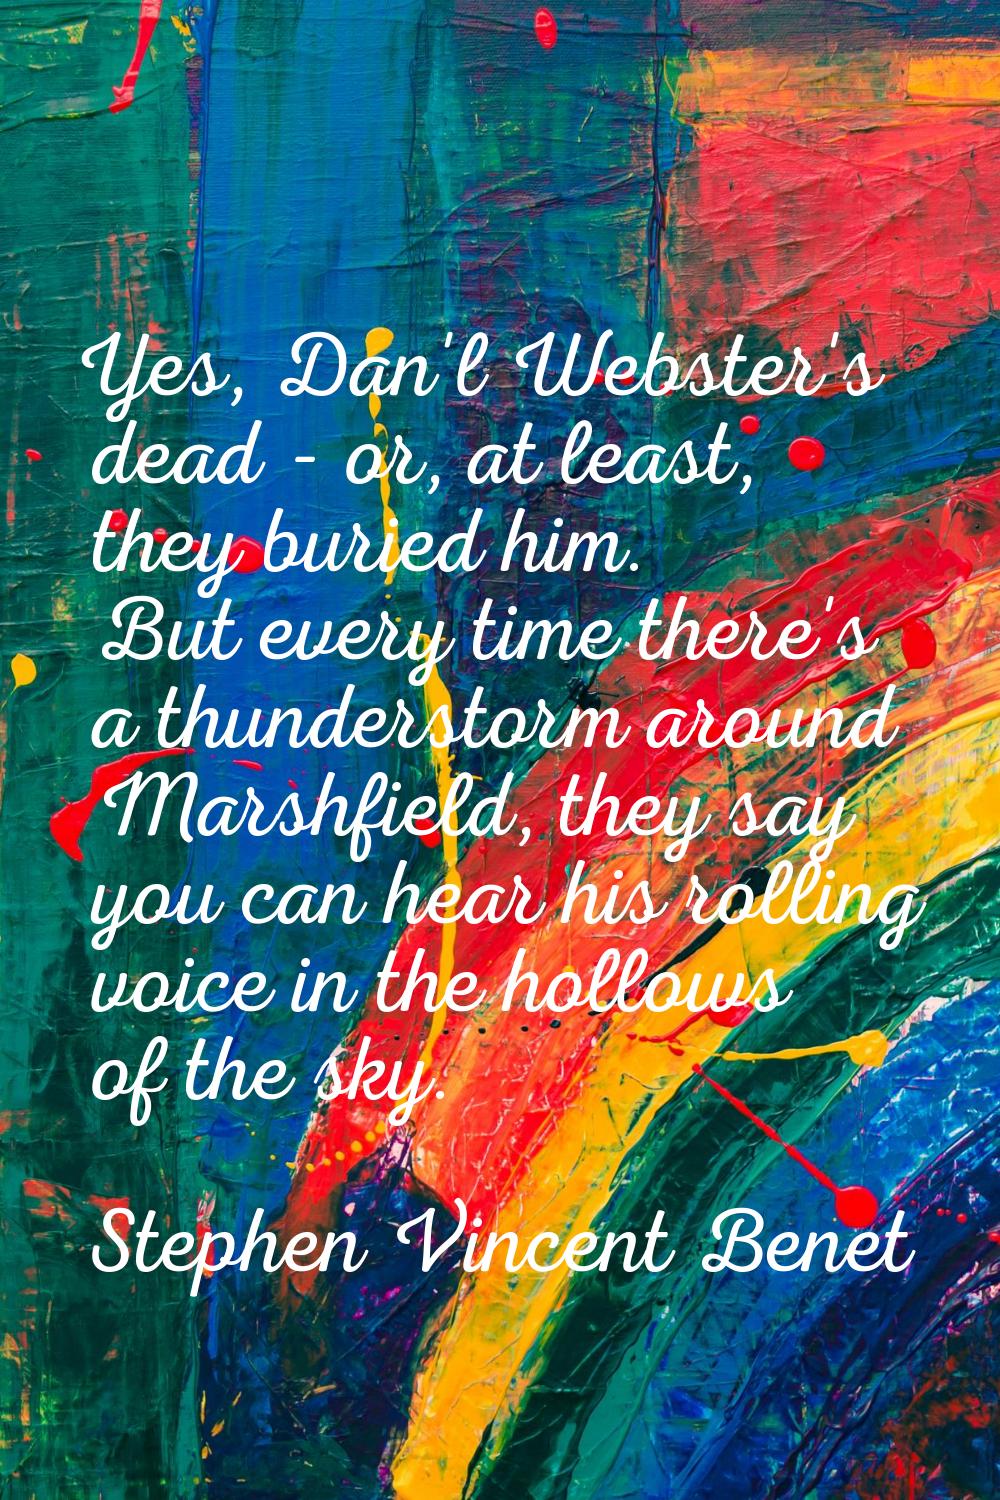 Yes, Dan'l Webster's dead - or, at least, they buried him. But every time there's a thunderstorm ar